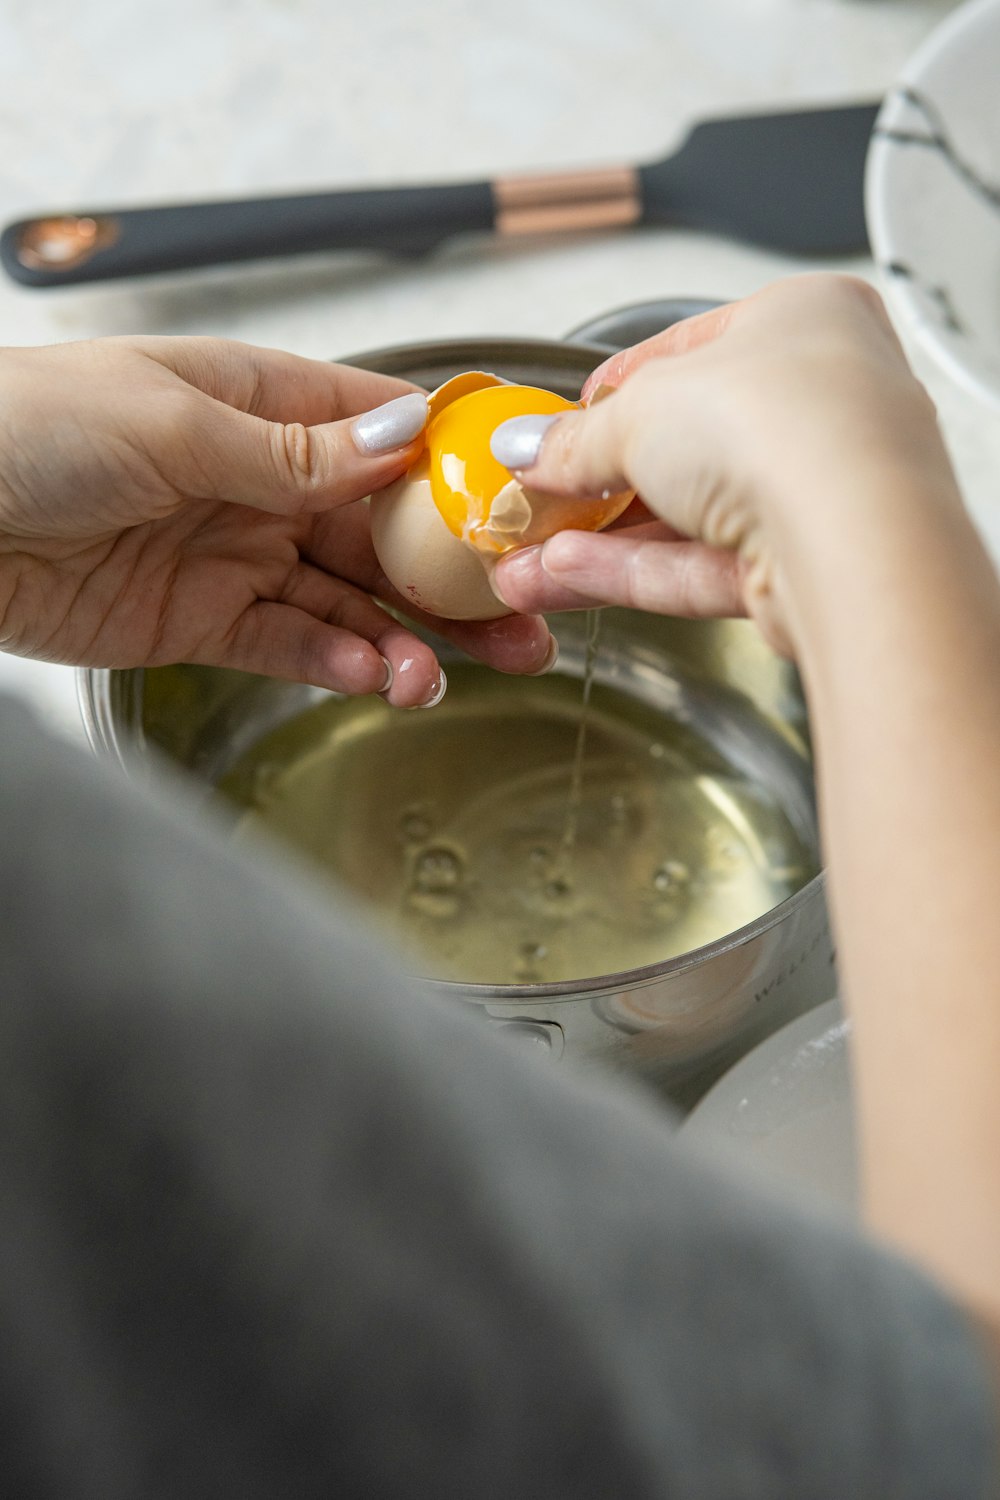 a woman is peeling an egg into a bowl